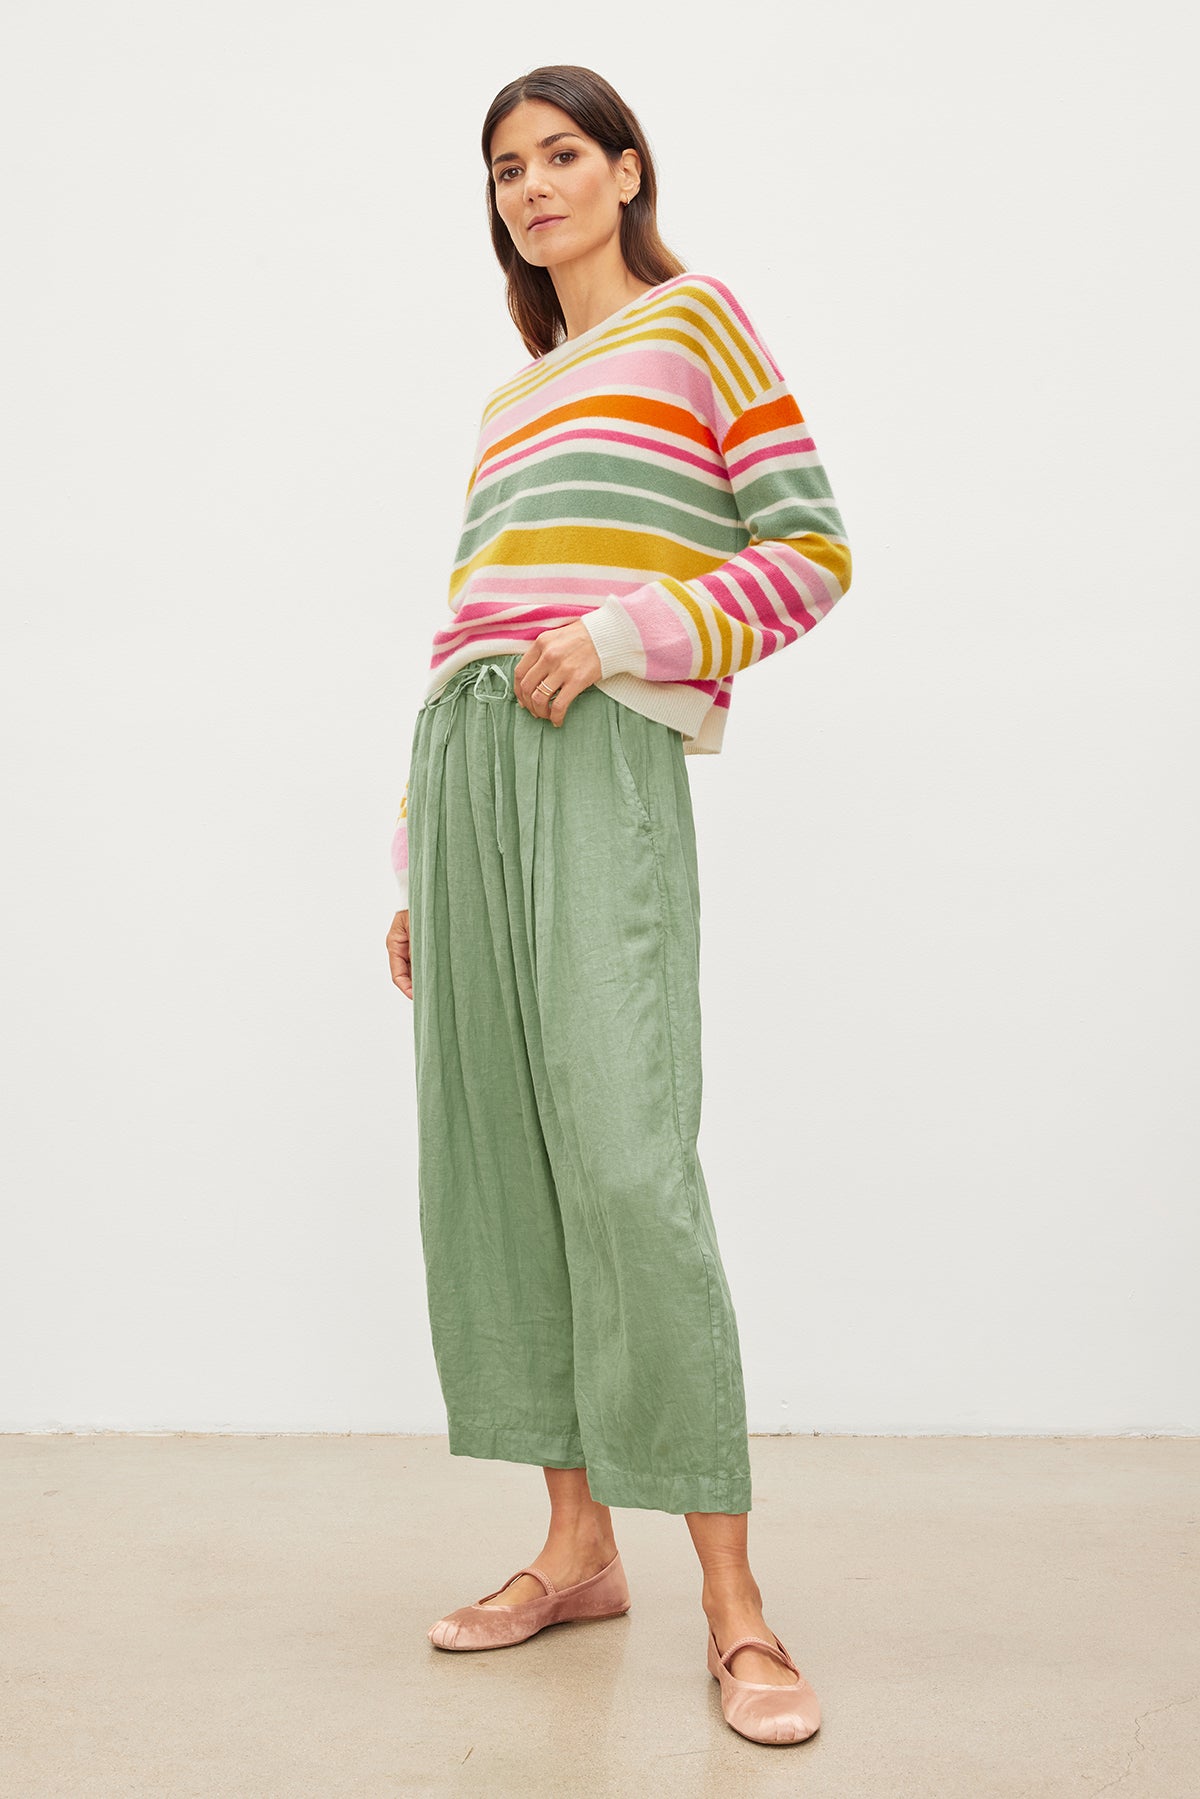   The model is wearing a Velvet by Graham & Spencer ANNY CASHMERE STRIPED CREW NECK SWEATER with ribbed details and green culottes. 